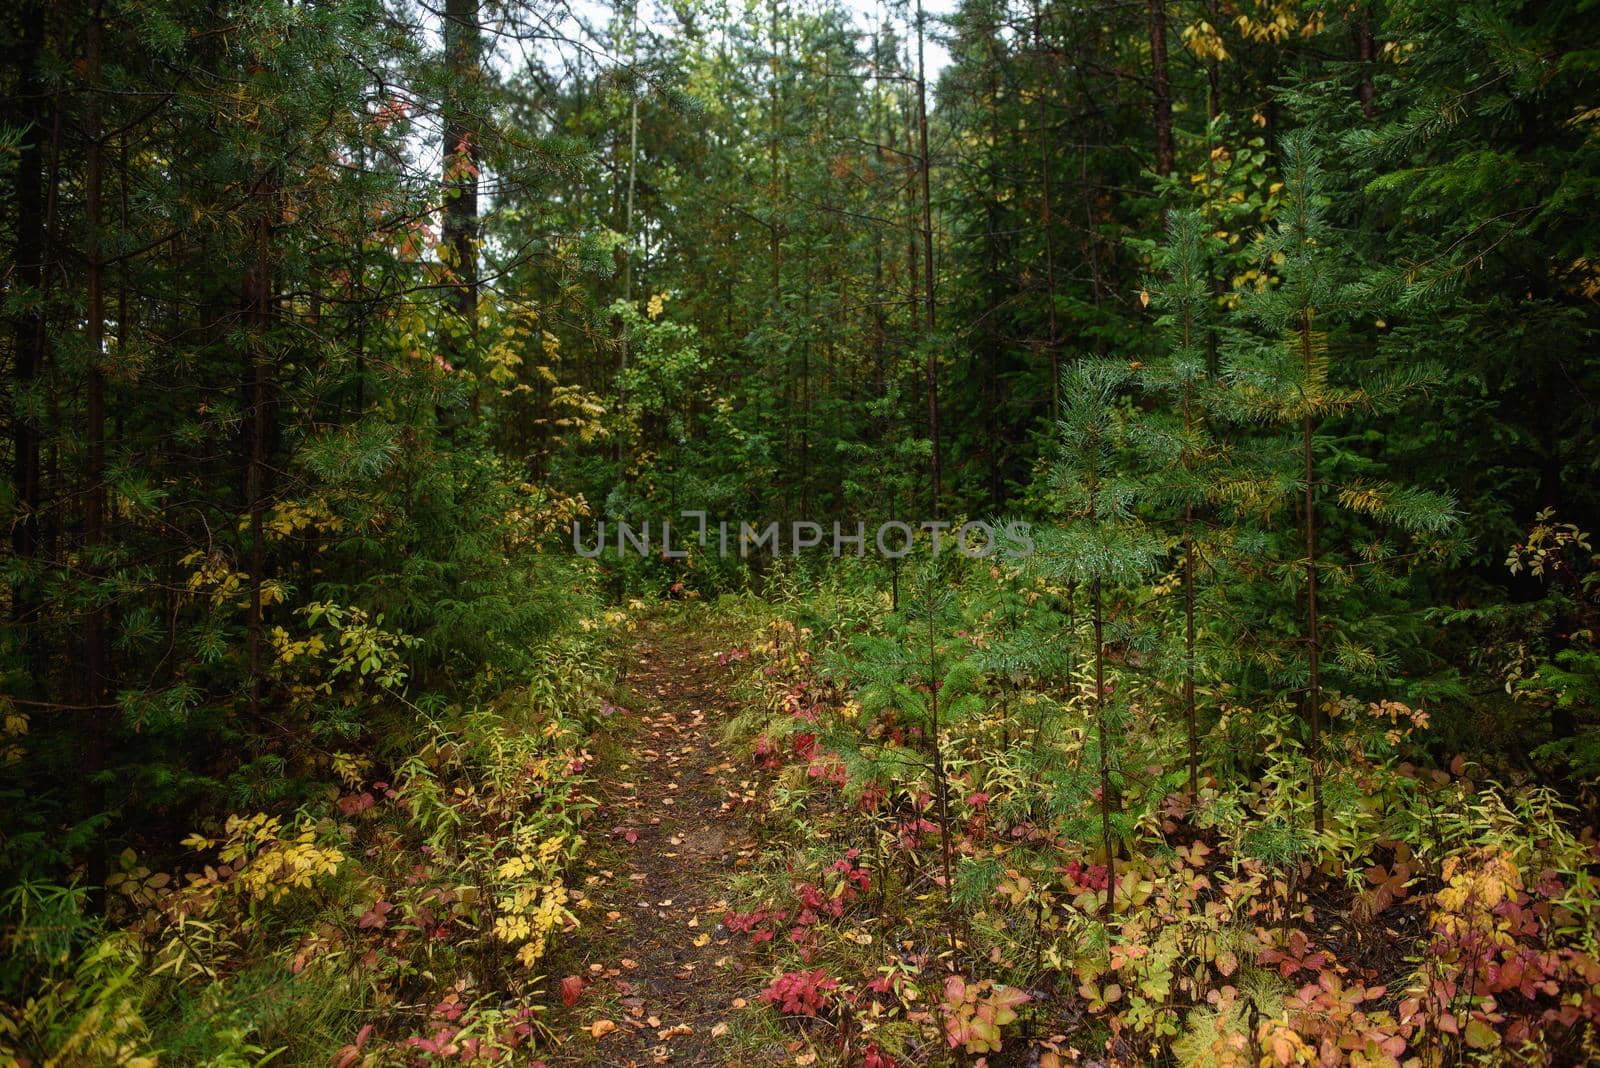 A path running past the trees of the northern forest in the autumn season.